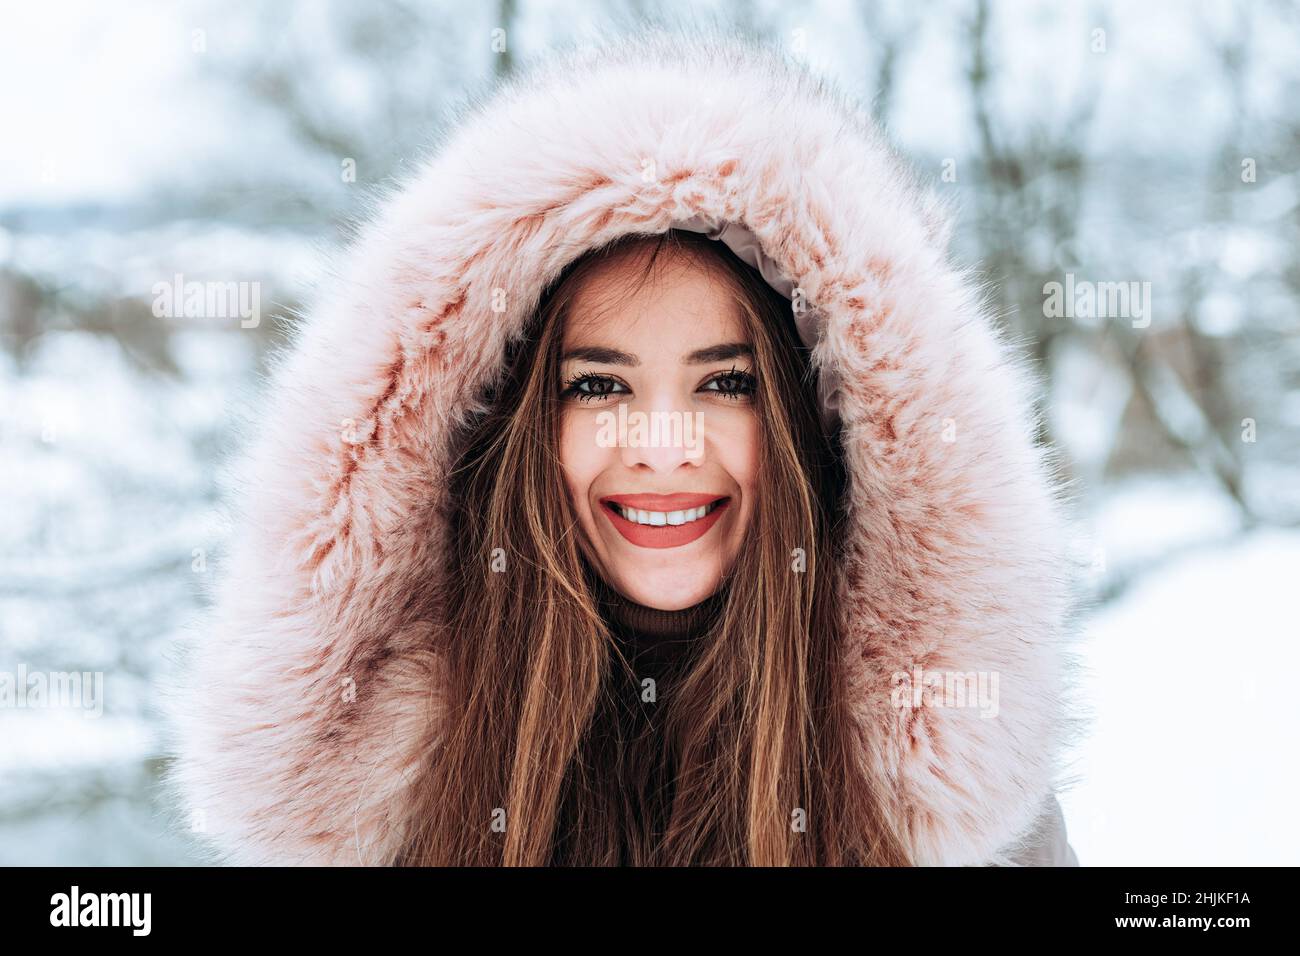 Outdoor portrait of a young woman in a winter fur jacket Stock Photo